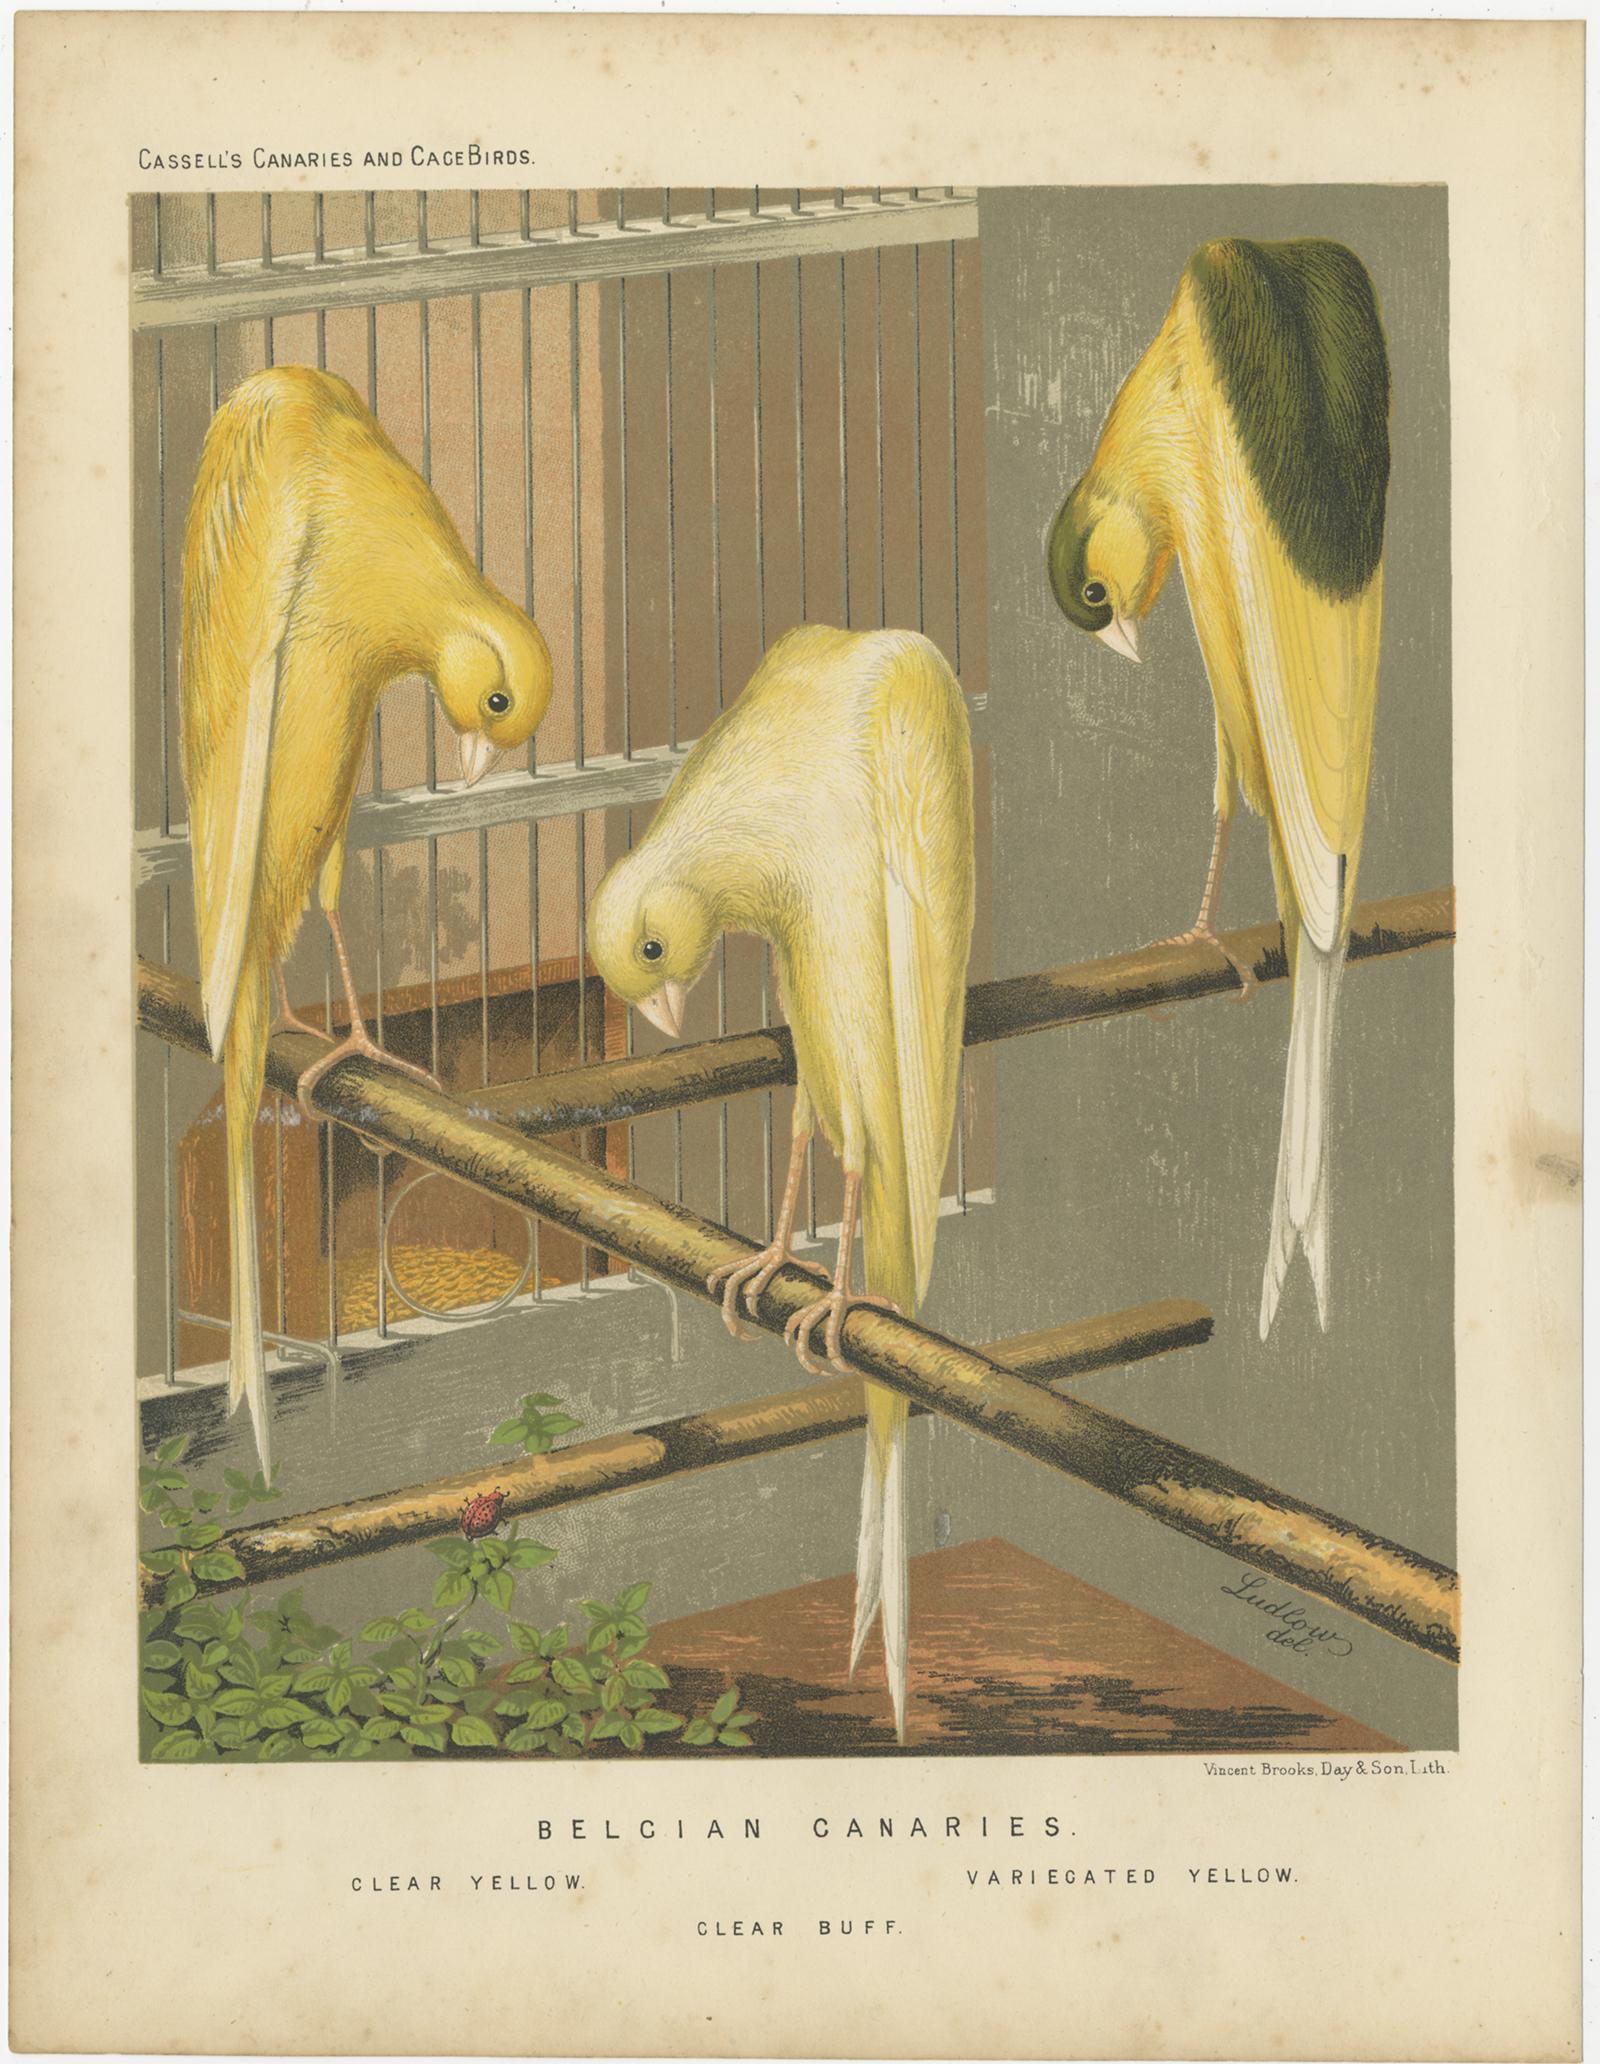 Antique bird print titled 'Belcian Canaries 1. Clear Yellow 2. Variecated Yellow 3. Clear Buff' Old bird print depicting the Clear Yellow, Variecated Yellow, Clear Buff Canaries. This print originates from: 'Illustrated book of canaries and